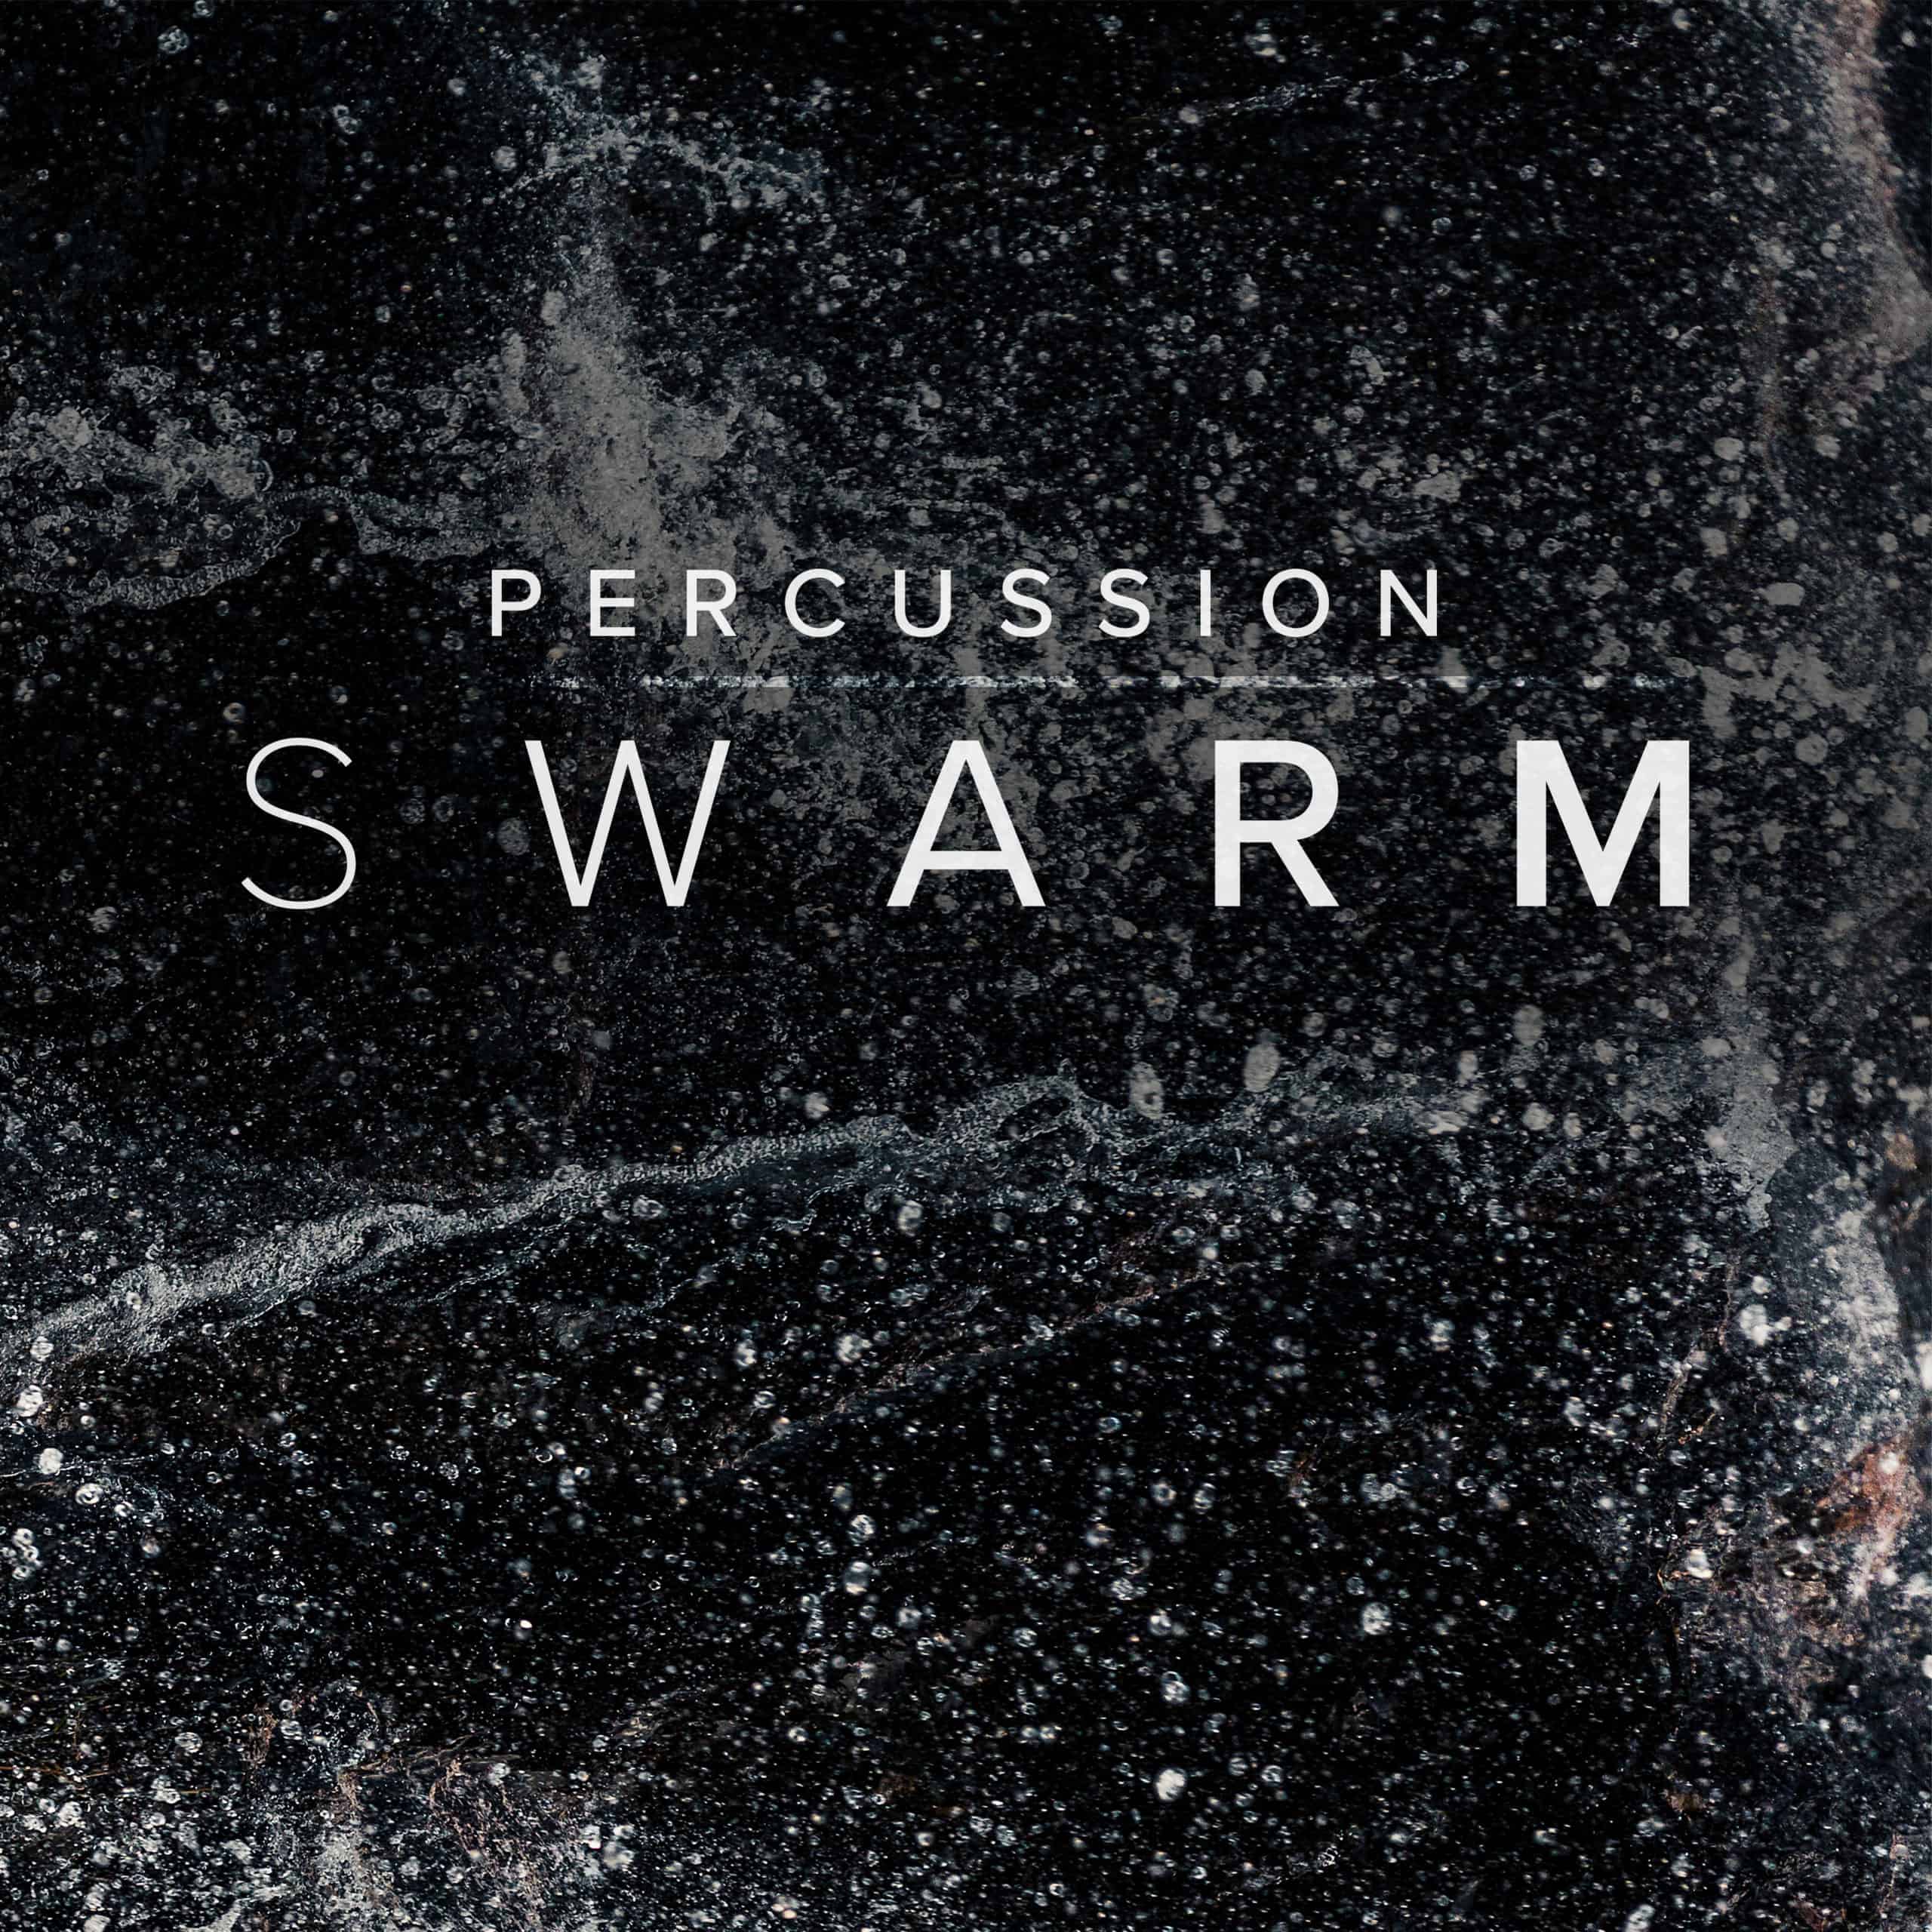 PERCUSSION SWARM by Spitfire Audio scm0286 square scaled